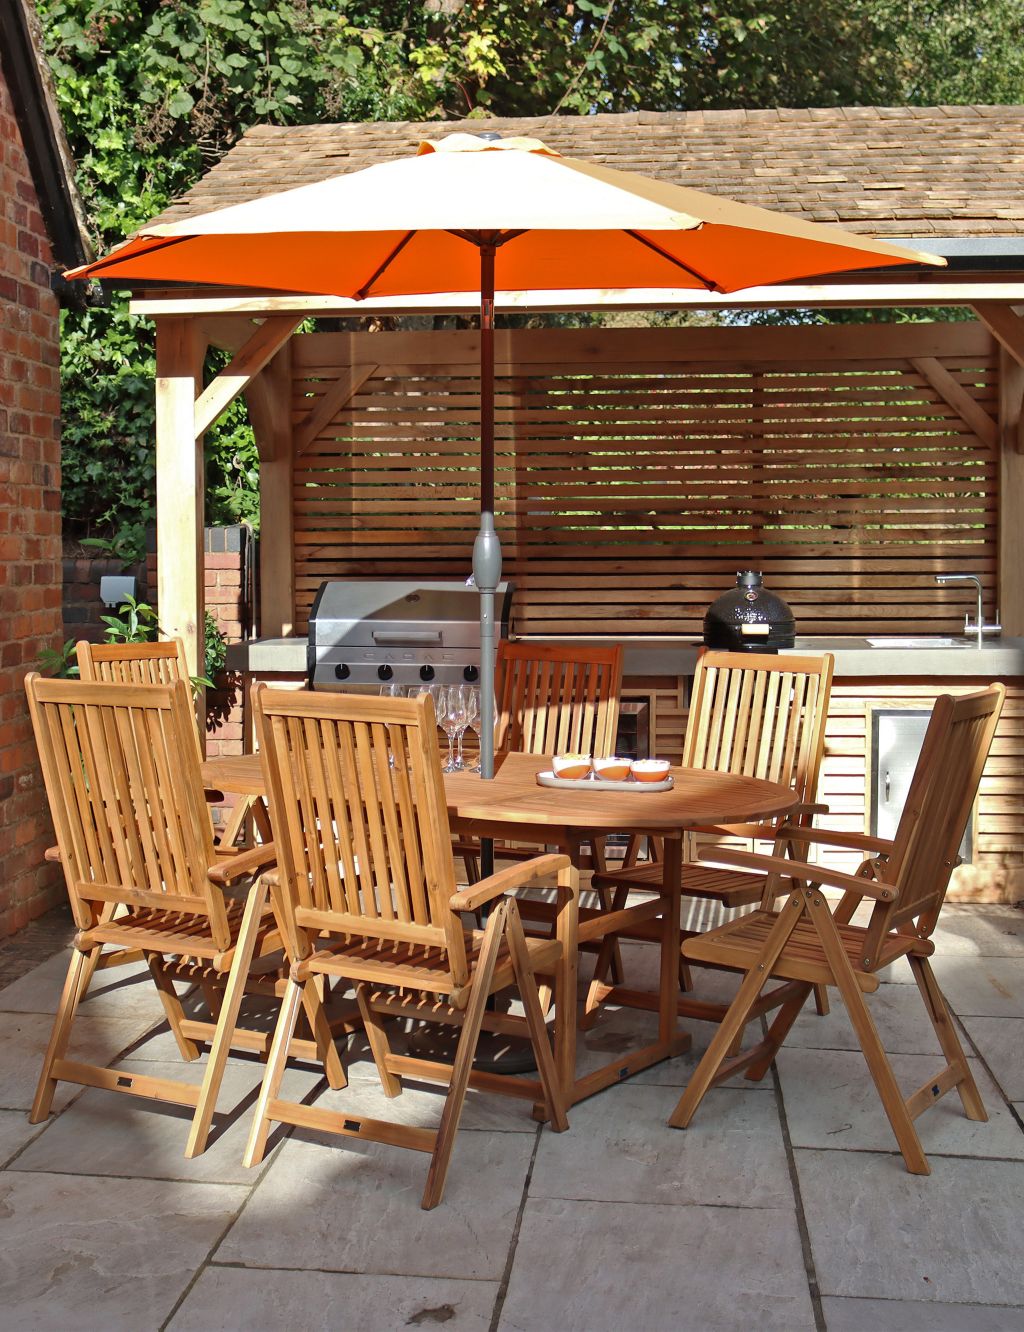 Turnbury 6 Seater Garden Table & Chairs